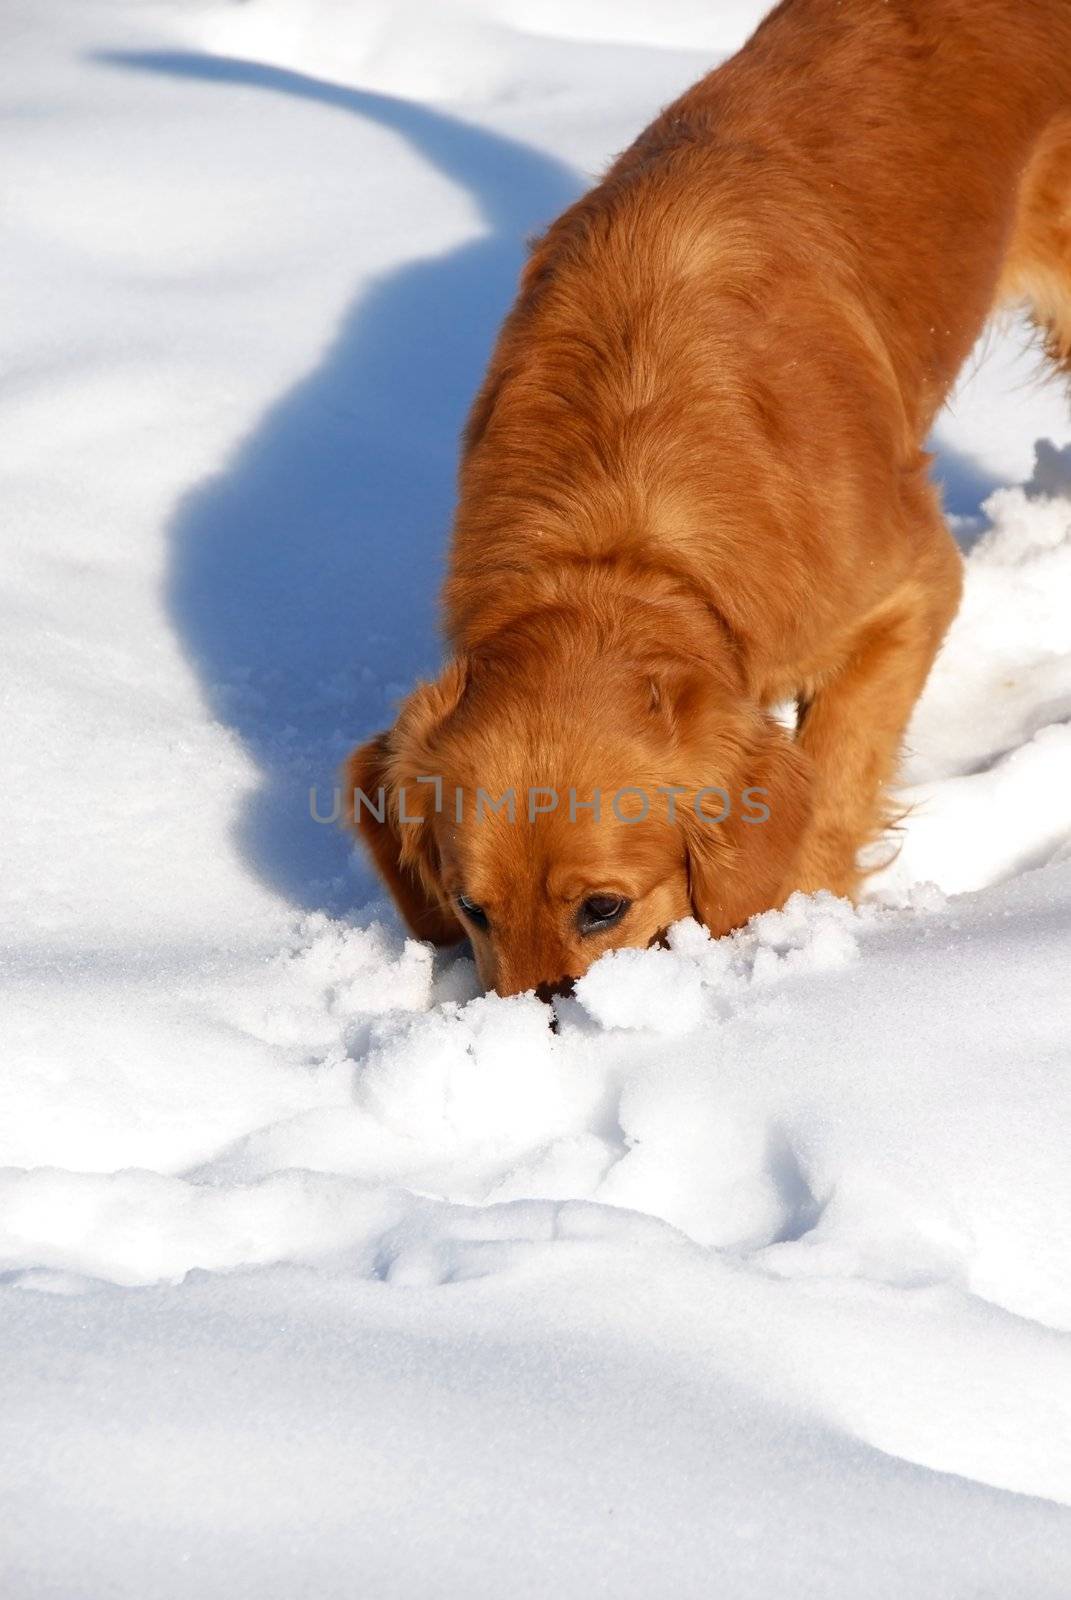 Dog at snow by simply